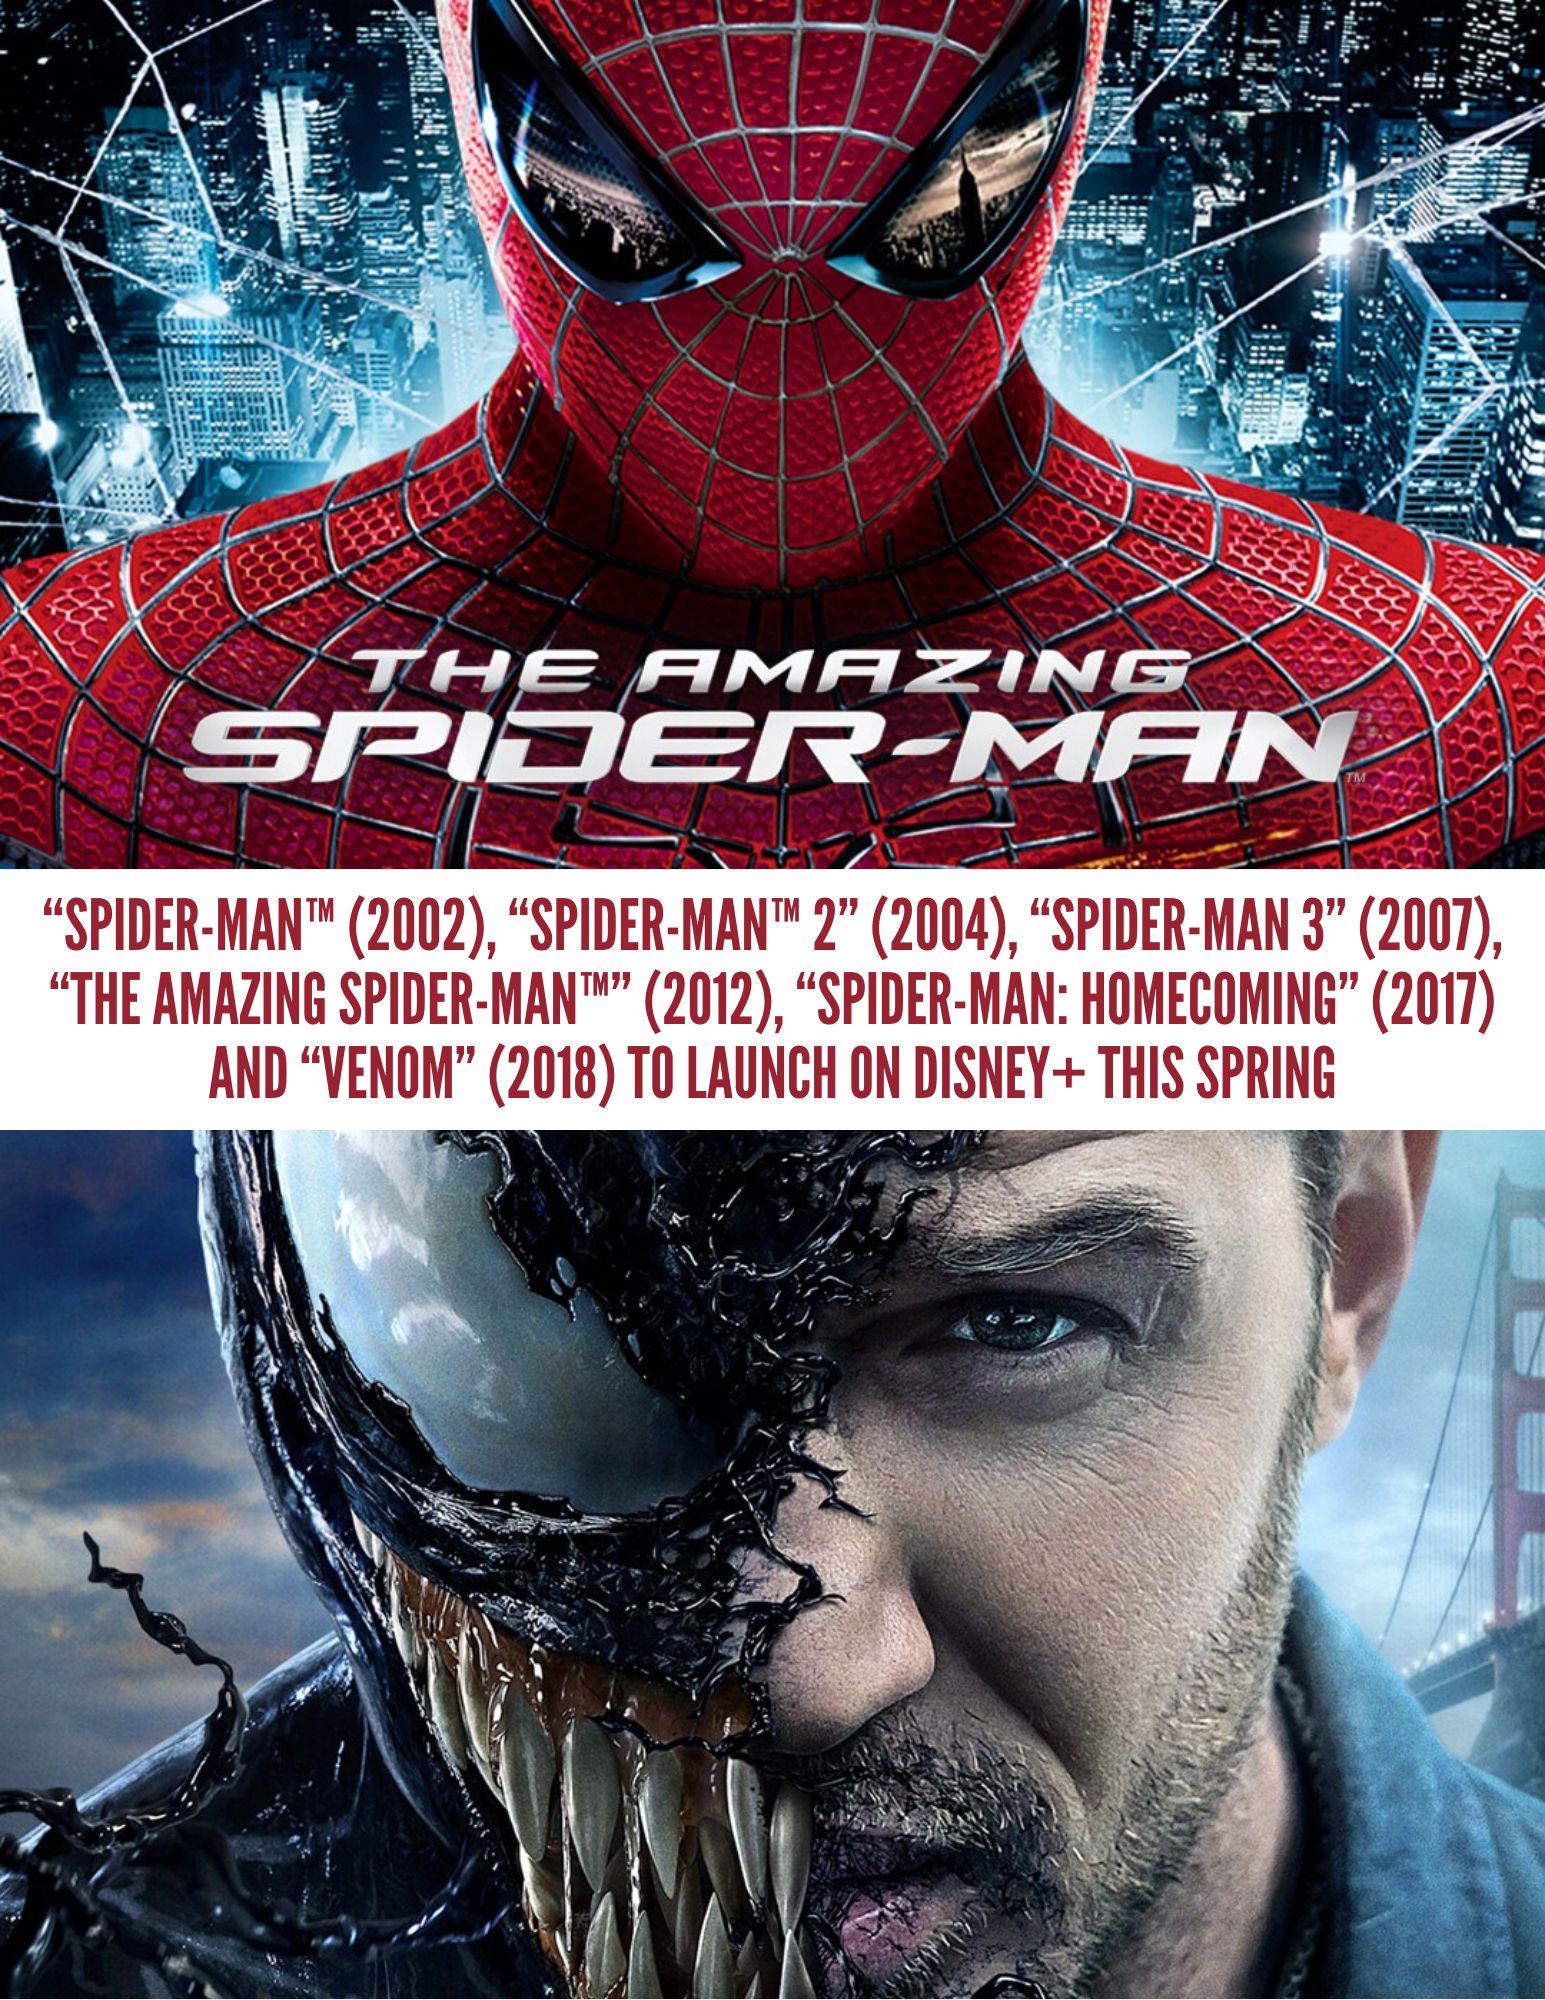 How to watch the Spider-Man movies in order (including Venom and